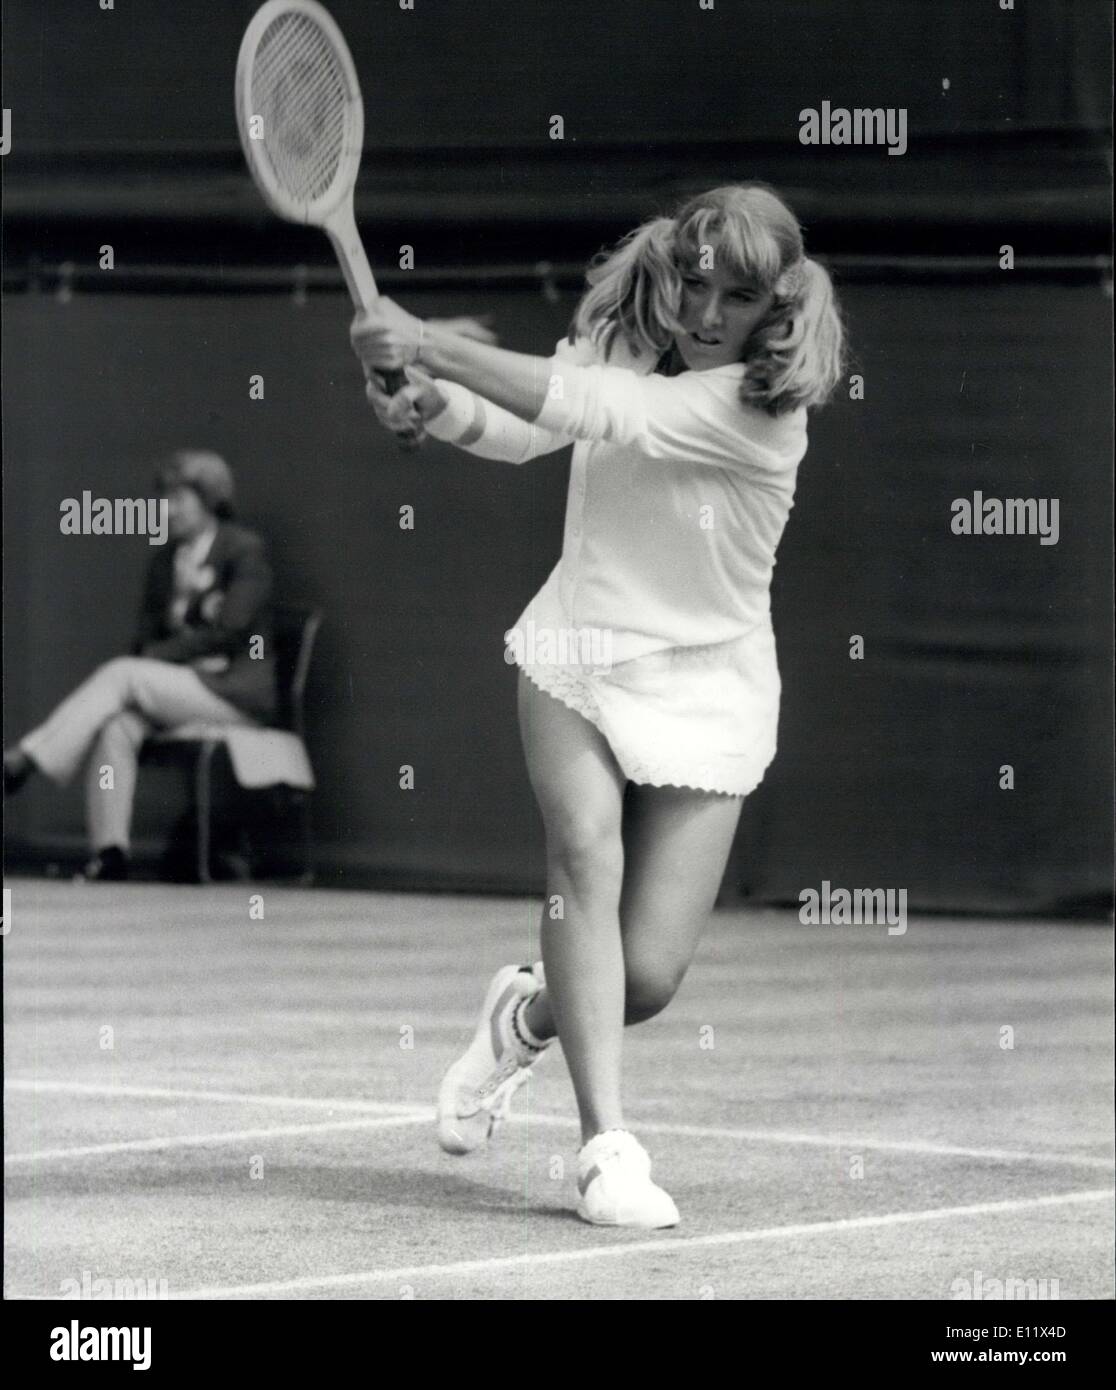 Jun. 24, 1980 - Wimbledon Tennis Tracy Austin V A. Moulton. Photo shows Tracy Austin (USA) seen in action on No. 1 court today against Miss A. Moulton (USA) during the first round of the ladies singles. Stock Photo